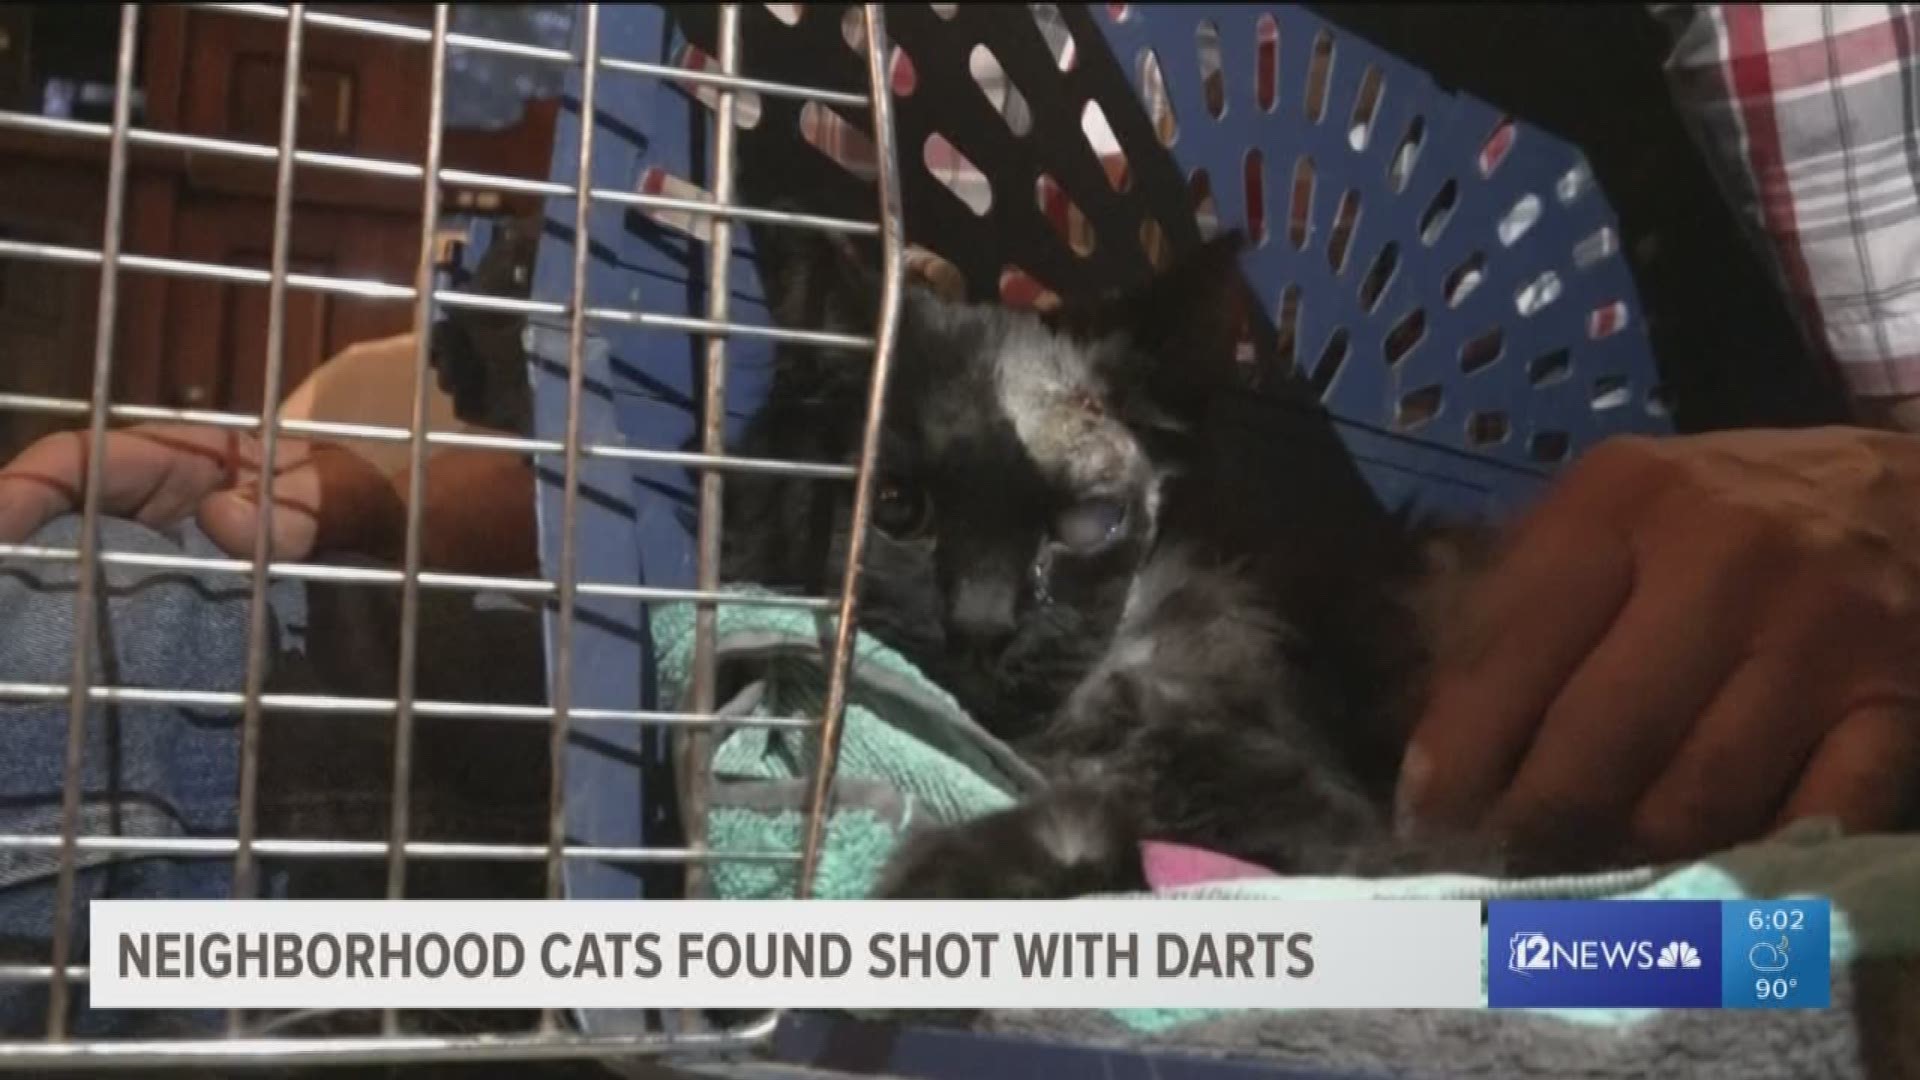 At least three cats were found wounded with darts.